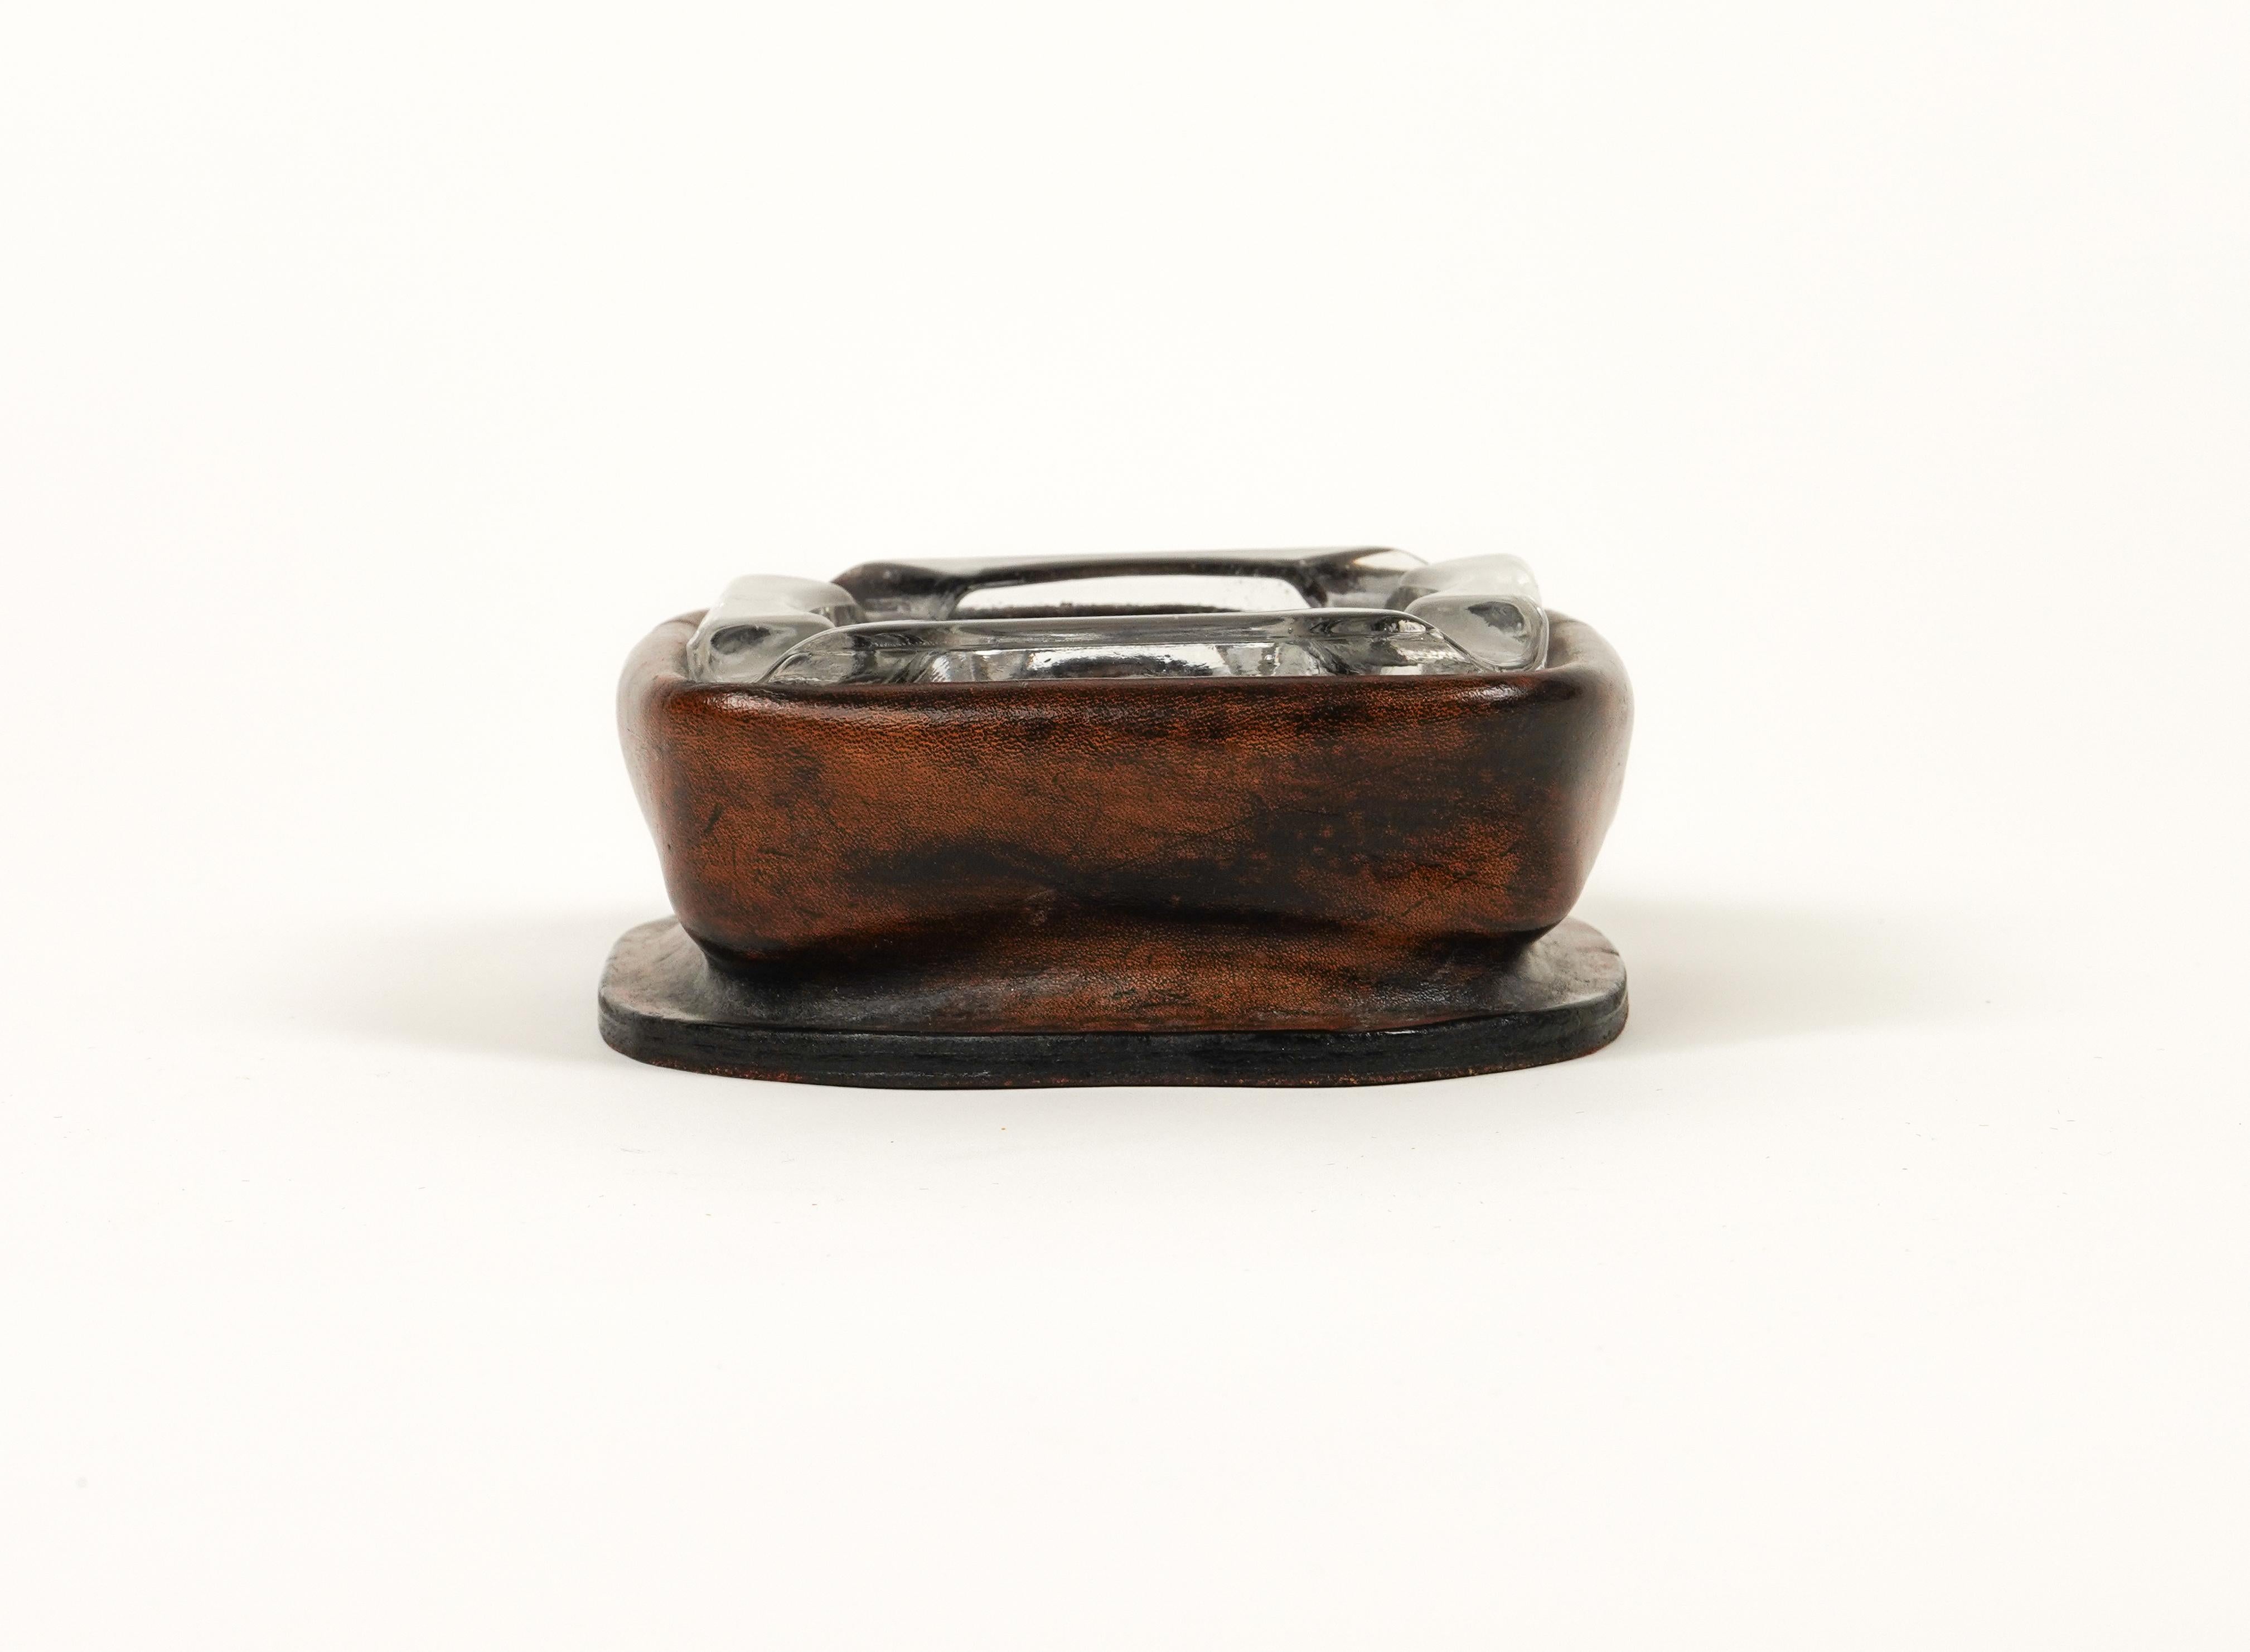 Midcentury Squared Ashtray in Leather and Glass Jacques Adnet Style, Italy 1970s For Sale 7